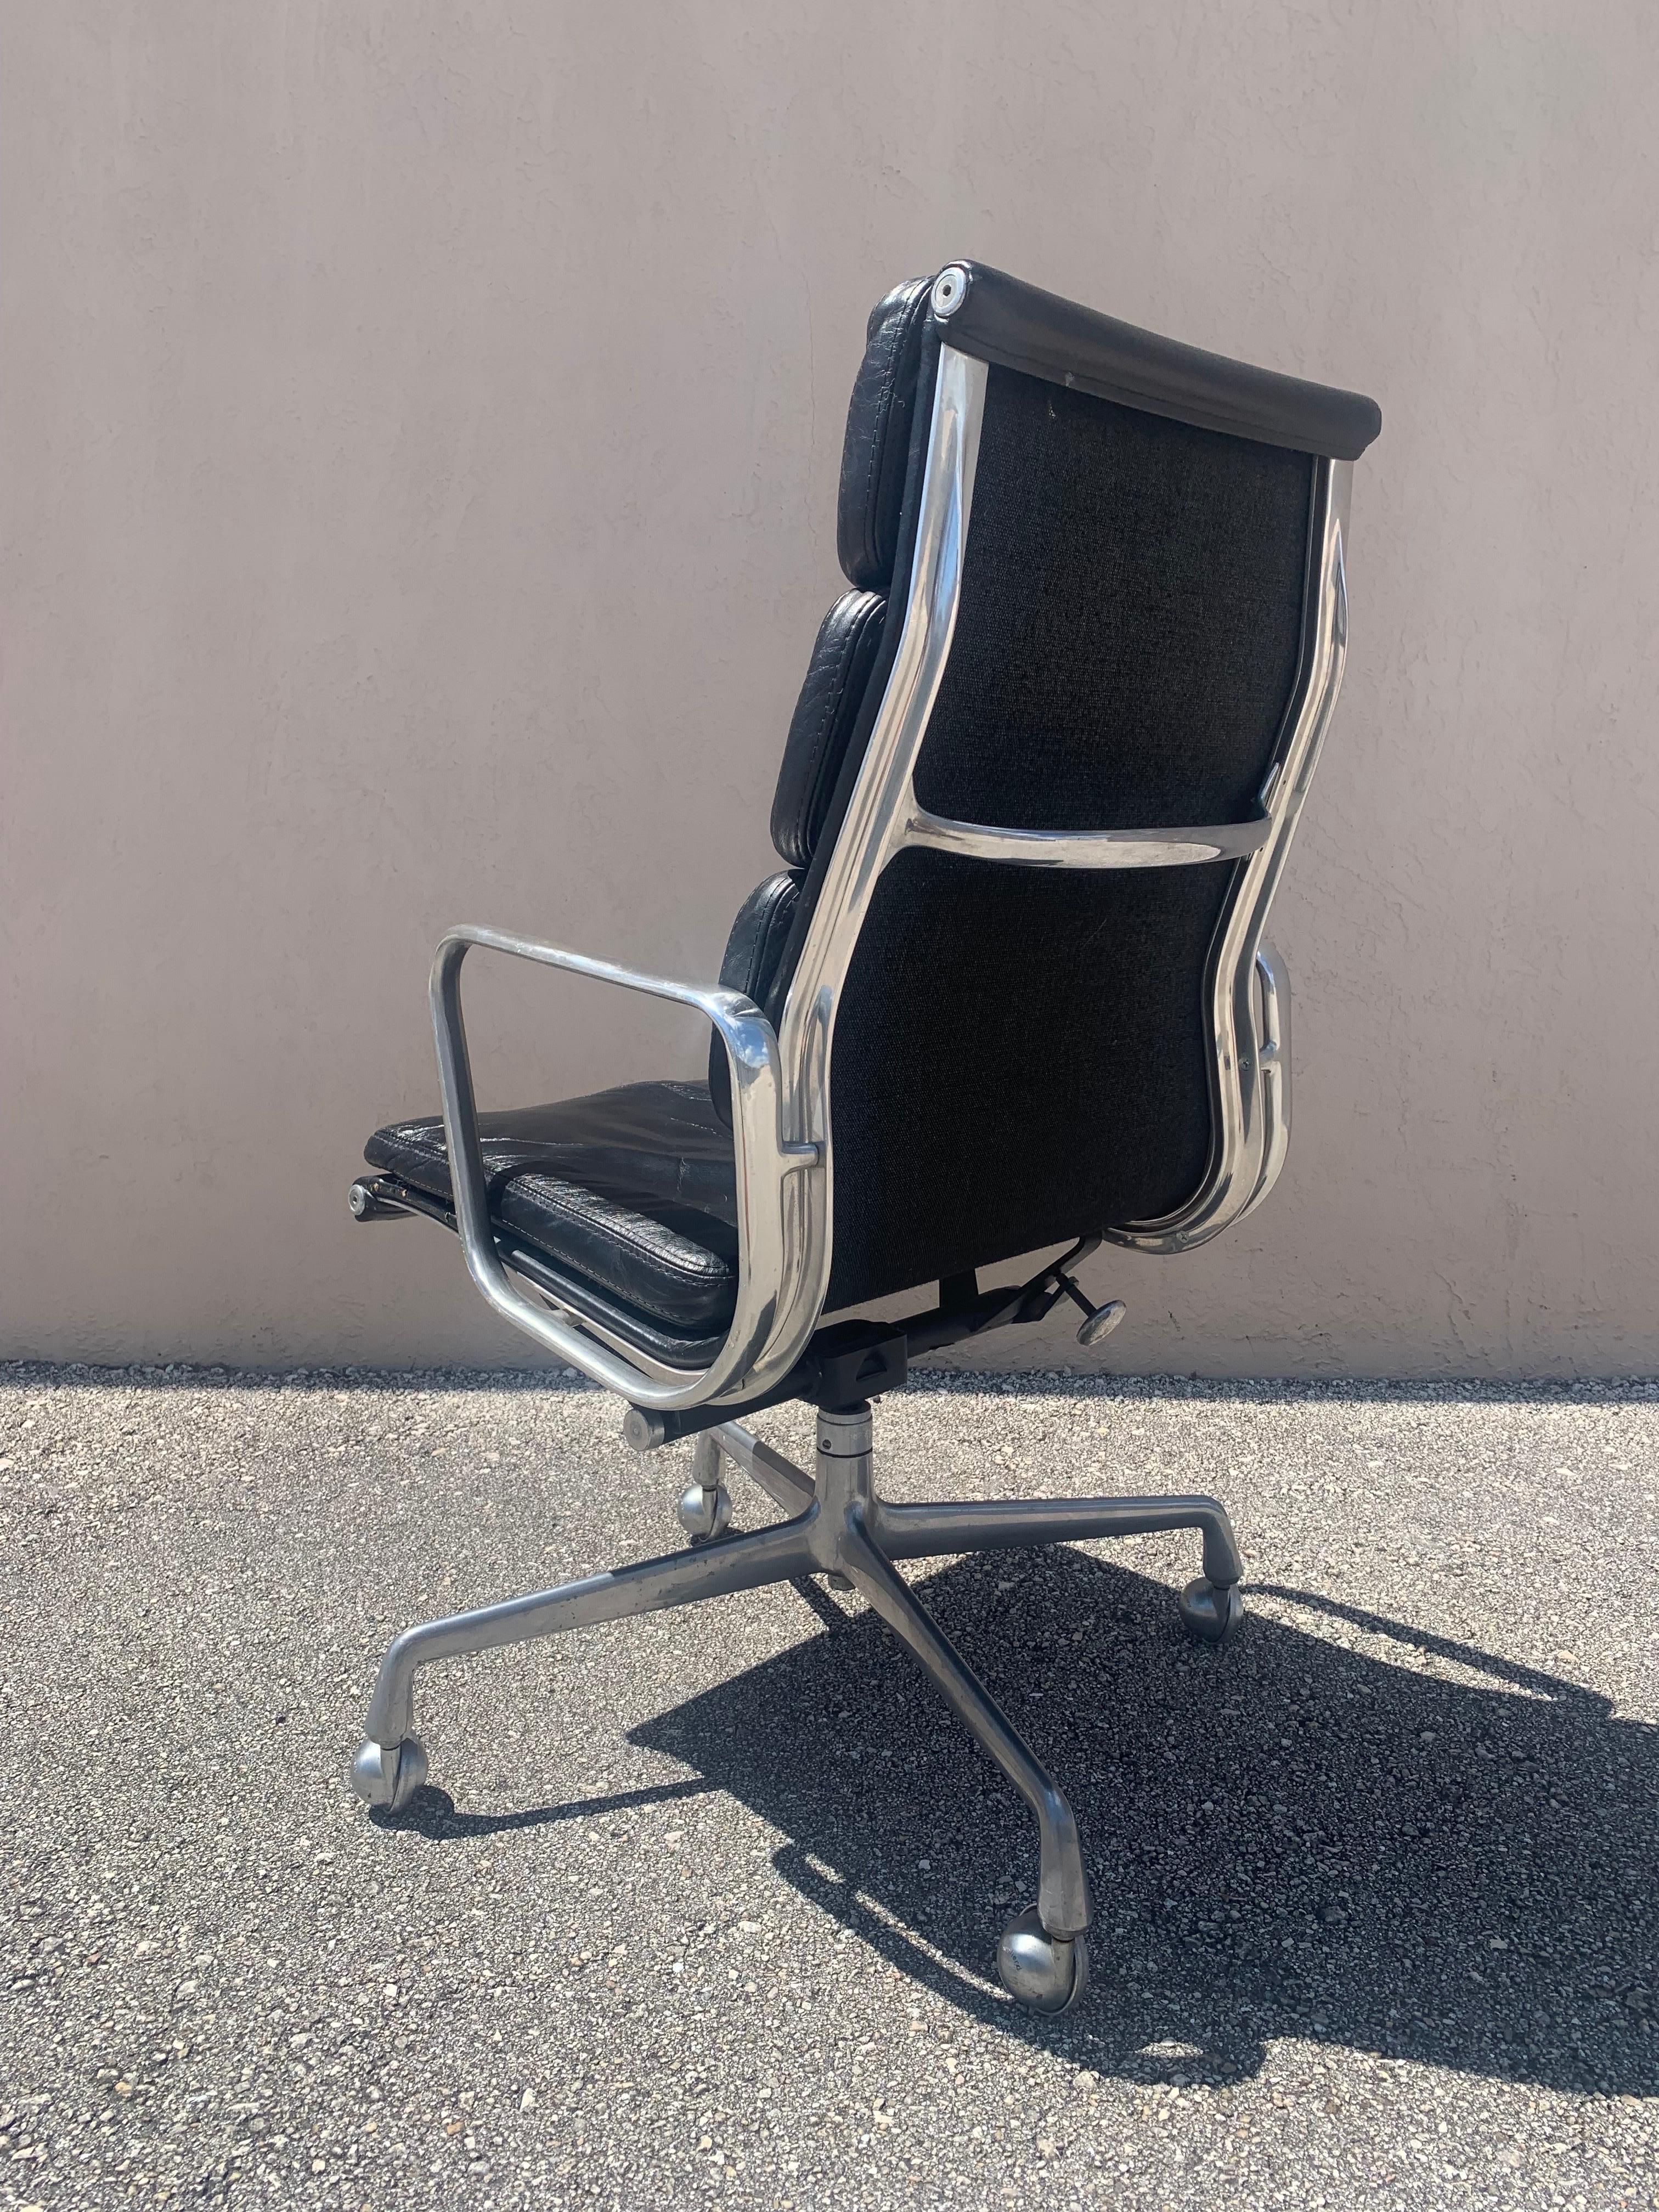 Original soft pad executive chair designed by Charles and Ray Eames in 1969 for Herman Miller. Known as one of the most comfortable desk chairs ever made and this example is no exception. One of Eame’s most recognizable design that is still made and